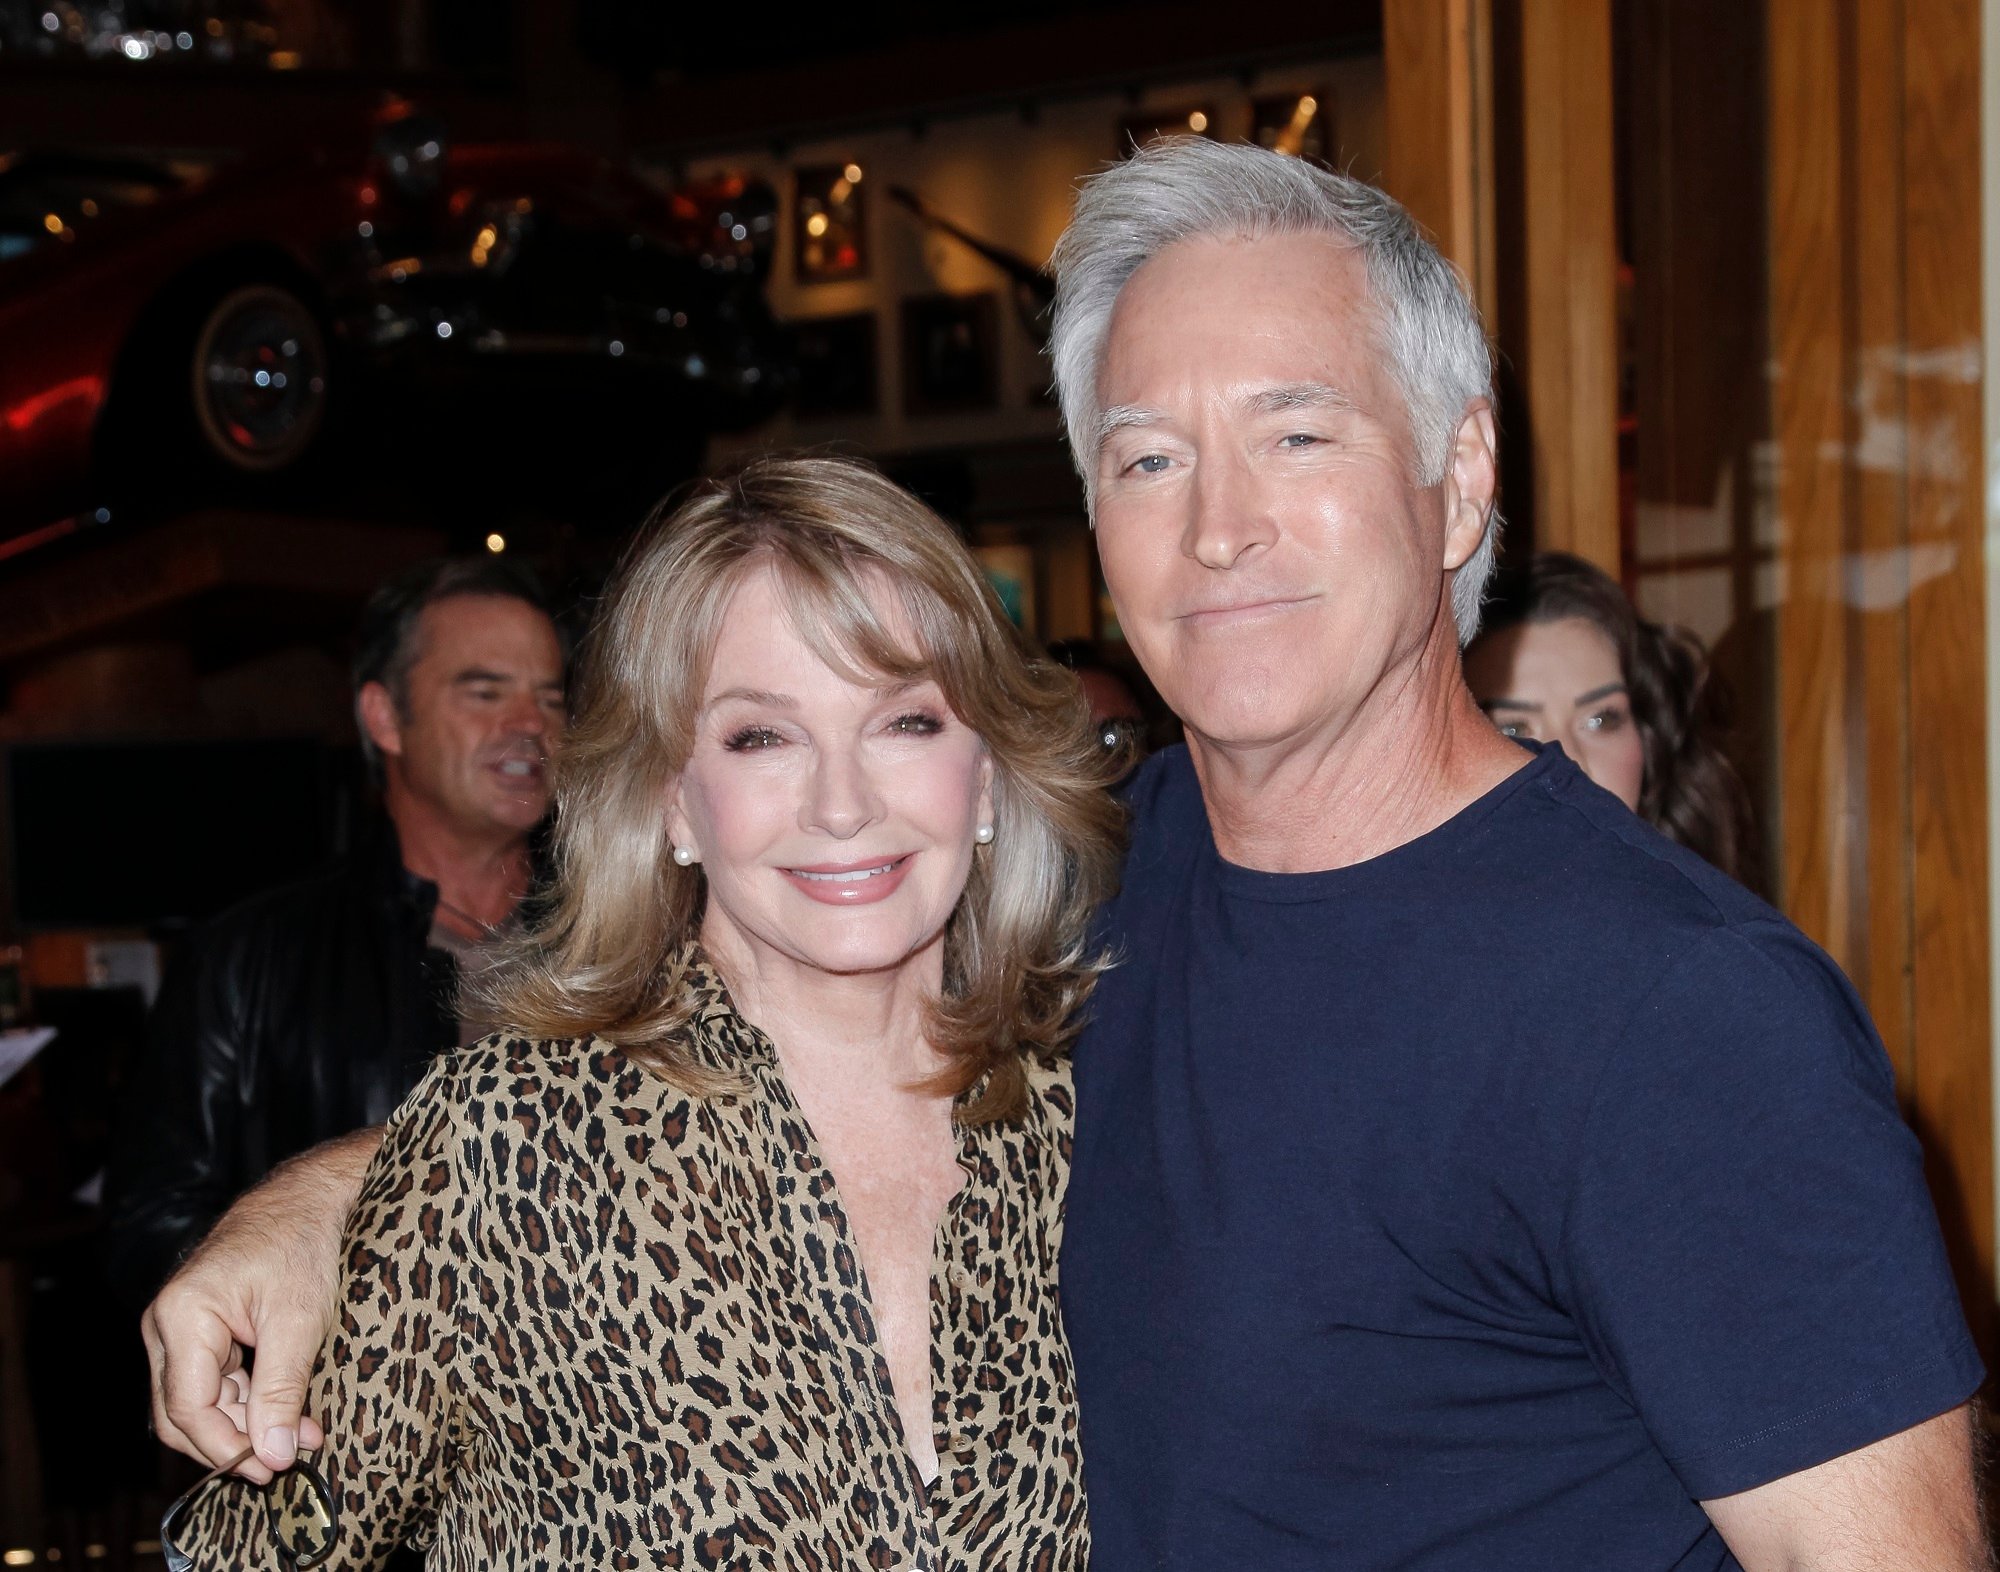 Days of Our Lives spoilers focus on Deidre Hall, pictured here in a leopard shirt